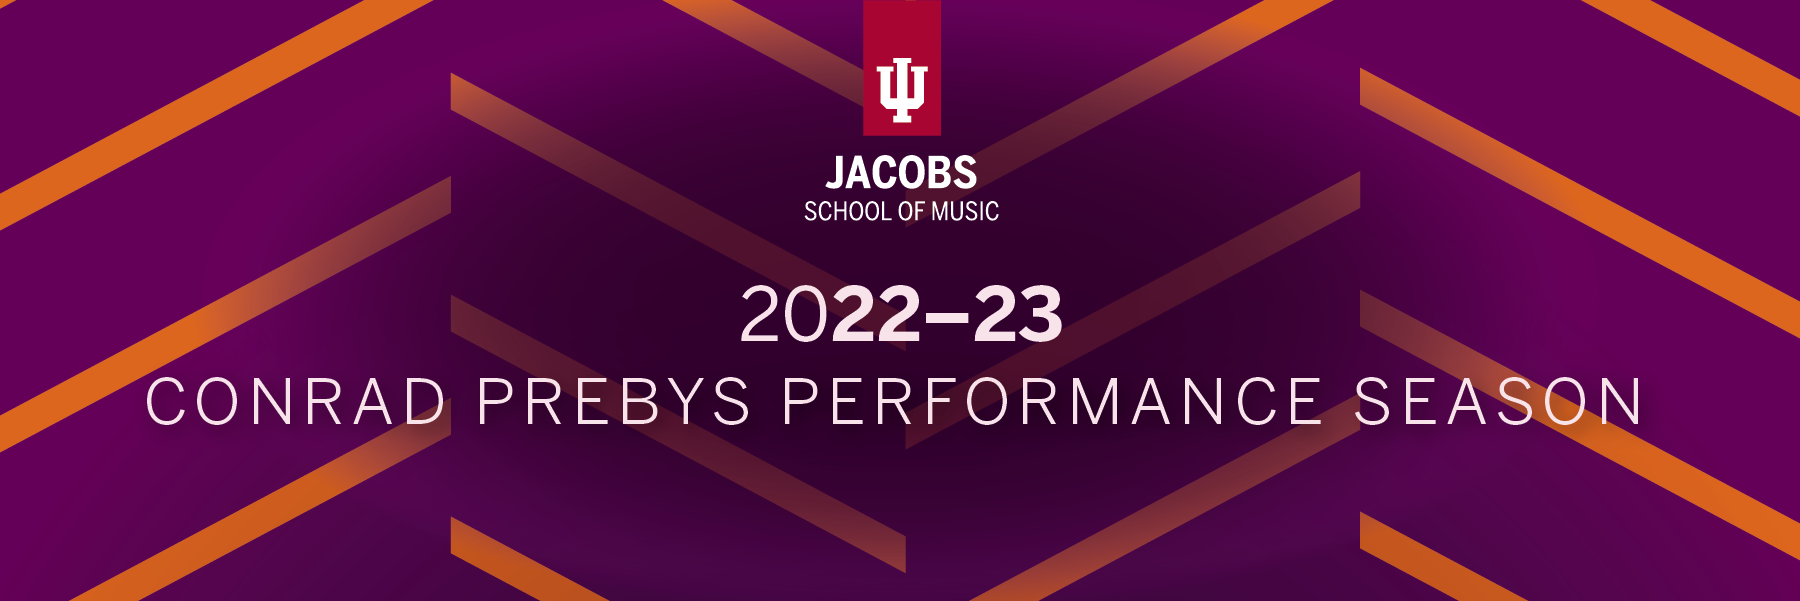 Text: IU Jacobs School of Music 2022-23 Conrad Prebys Performance Season. Purple background with orange stripes in the pattern of the Musical Arts Center carpet.